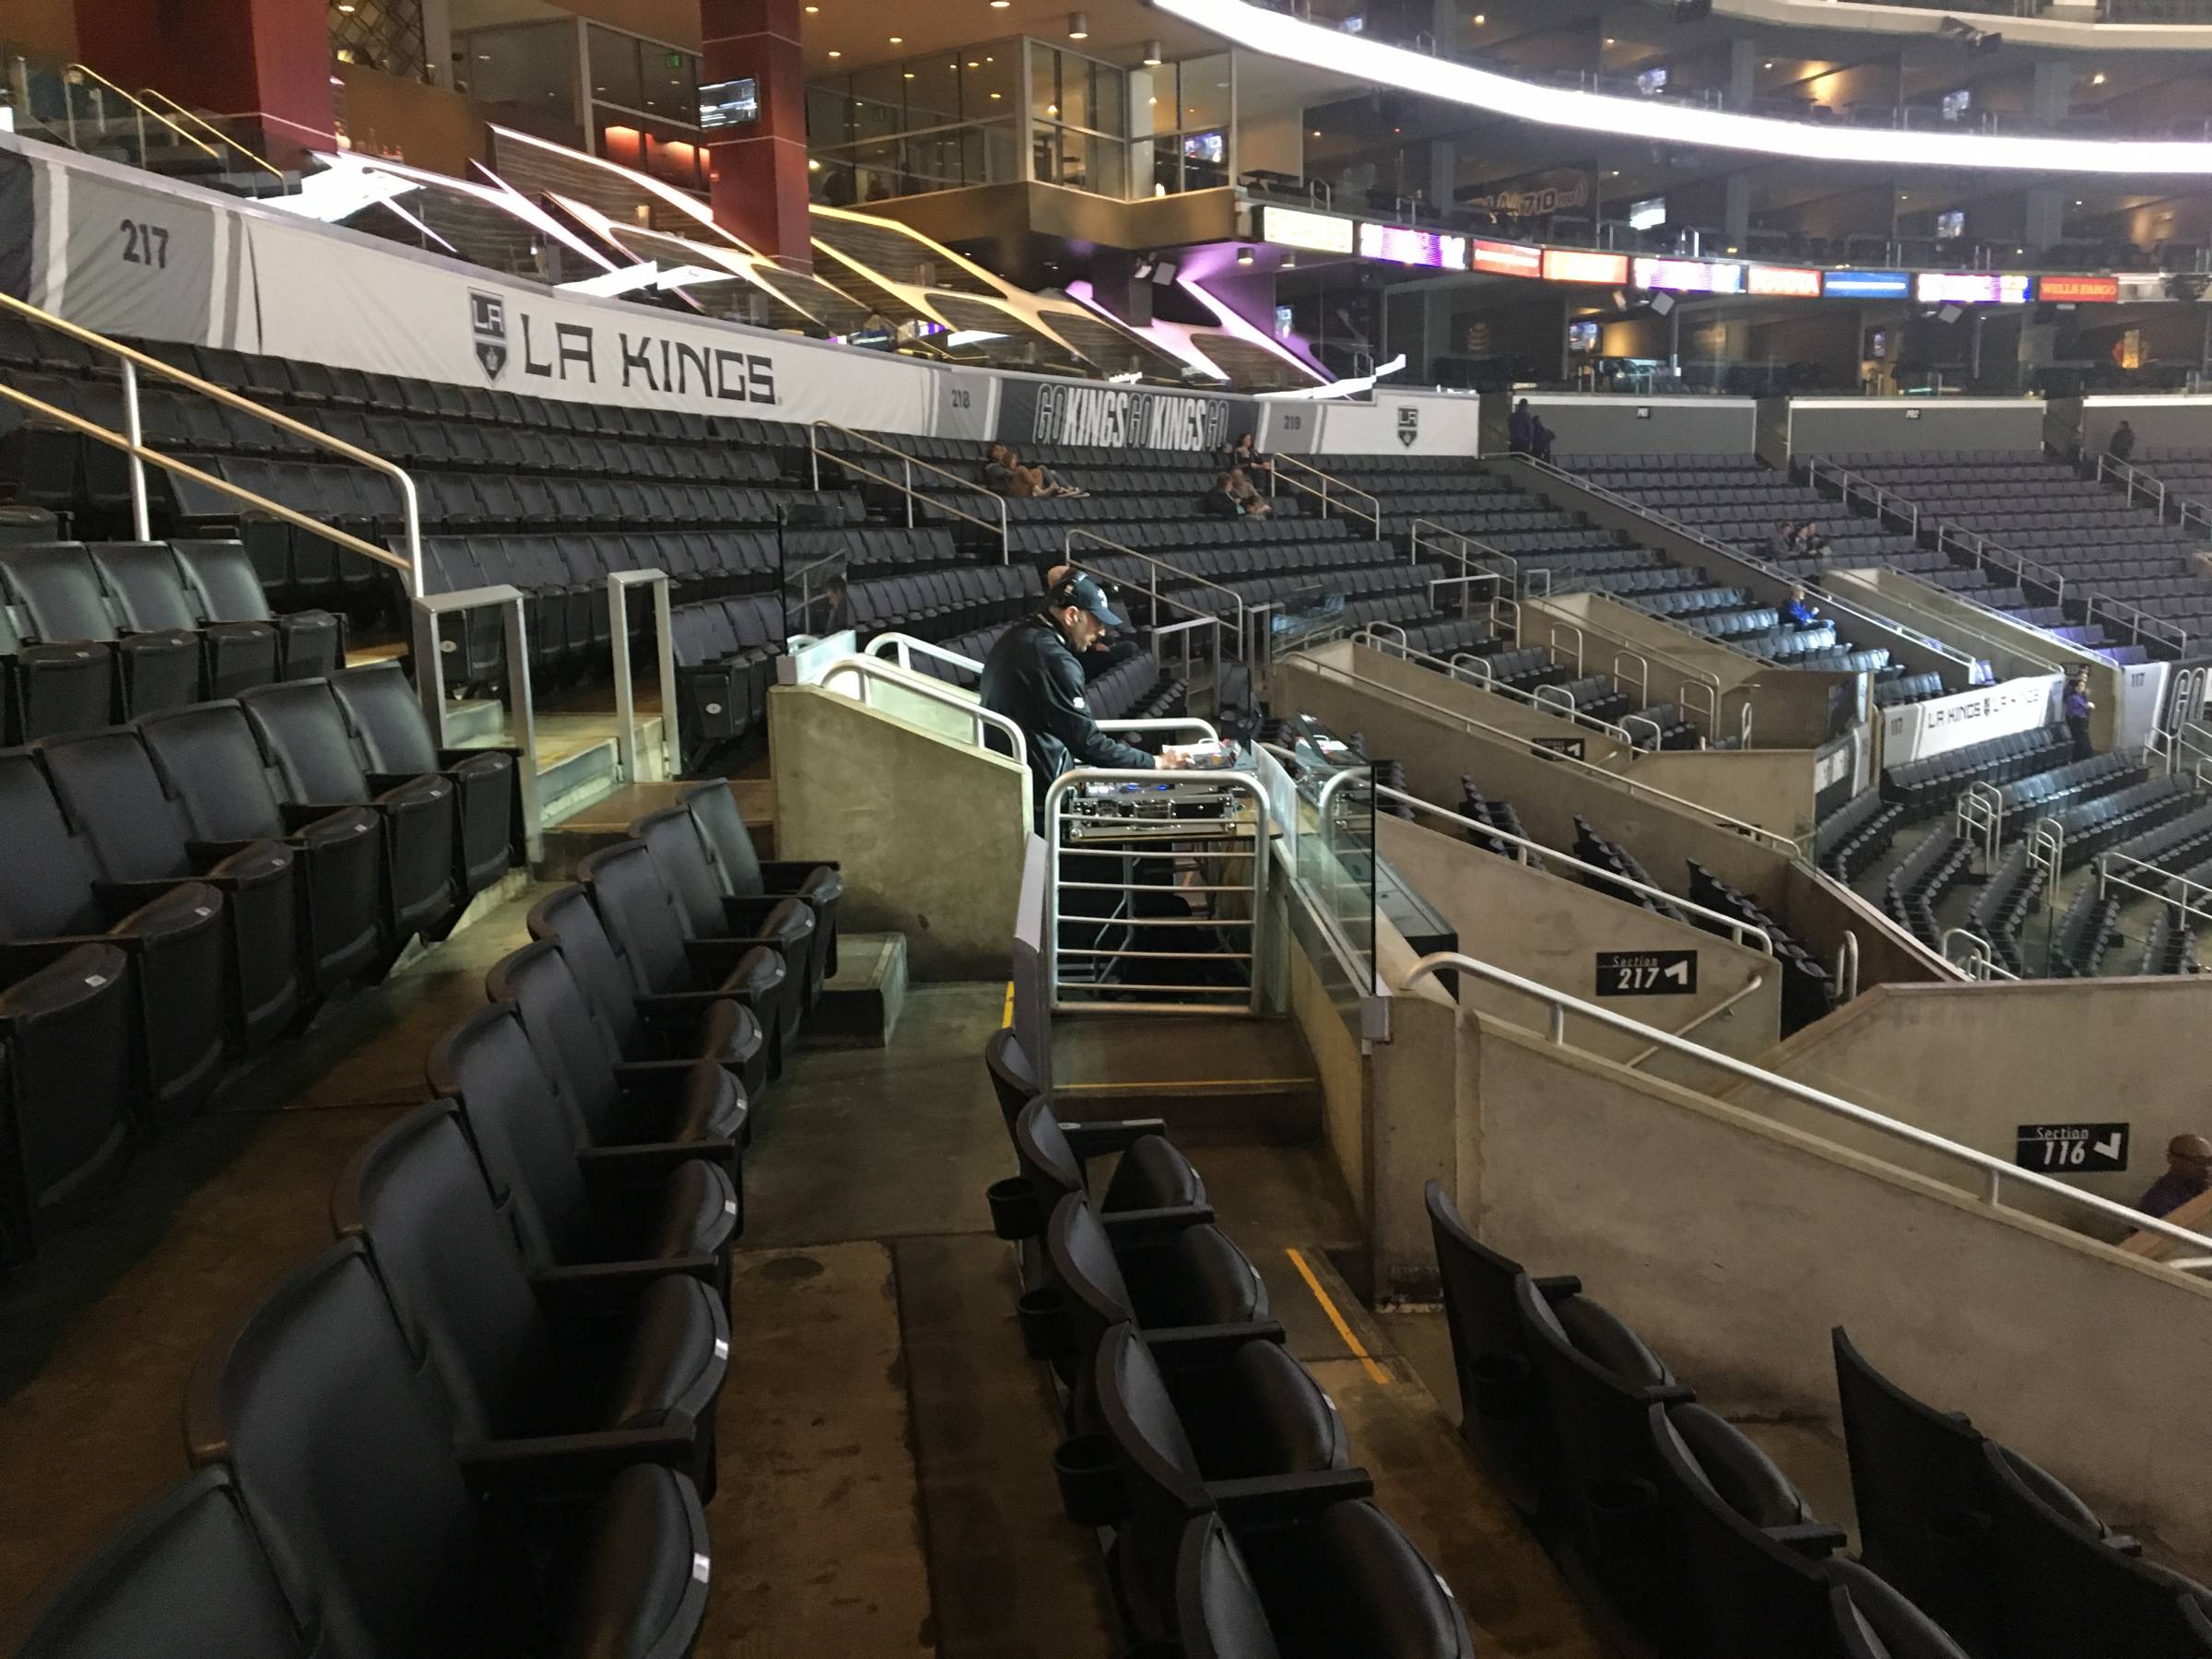 DJ between sections 216 and 217